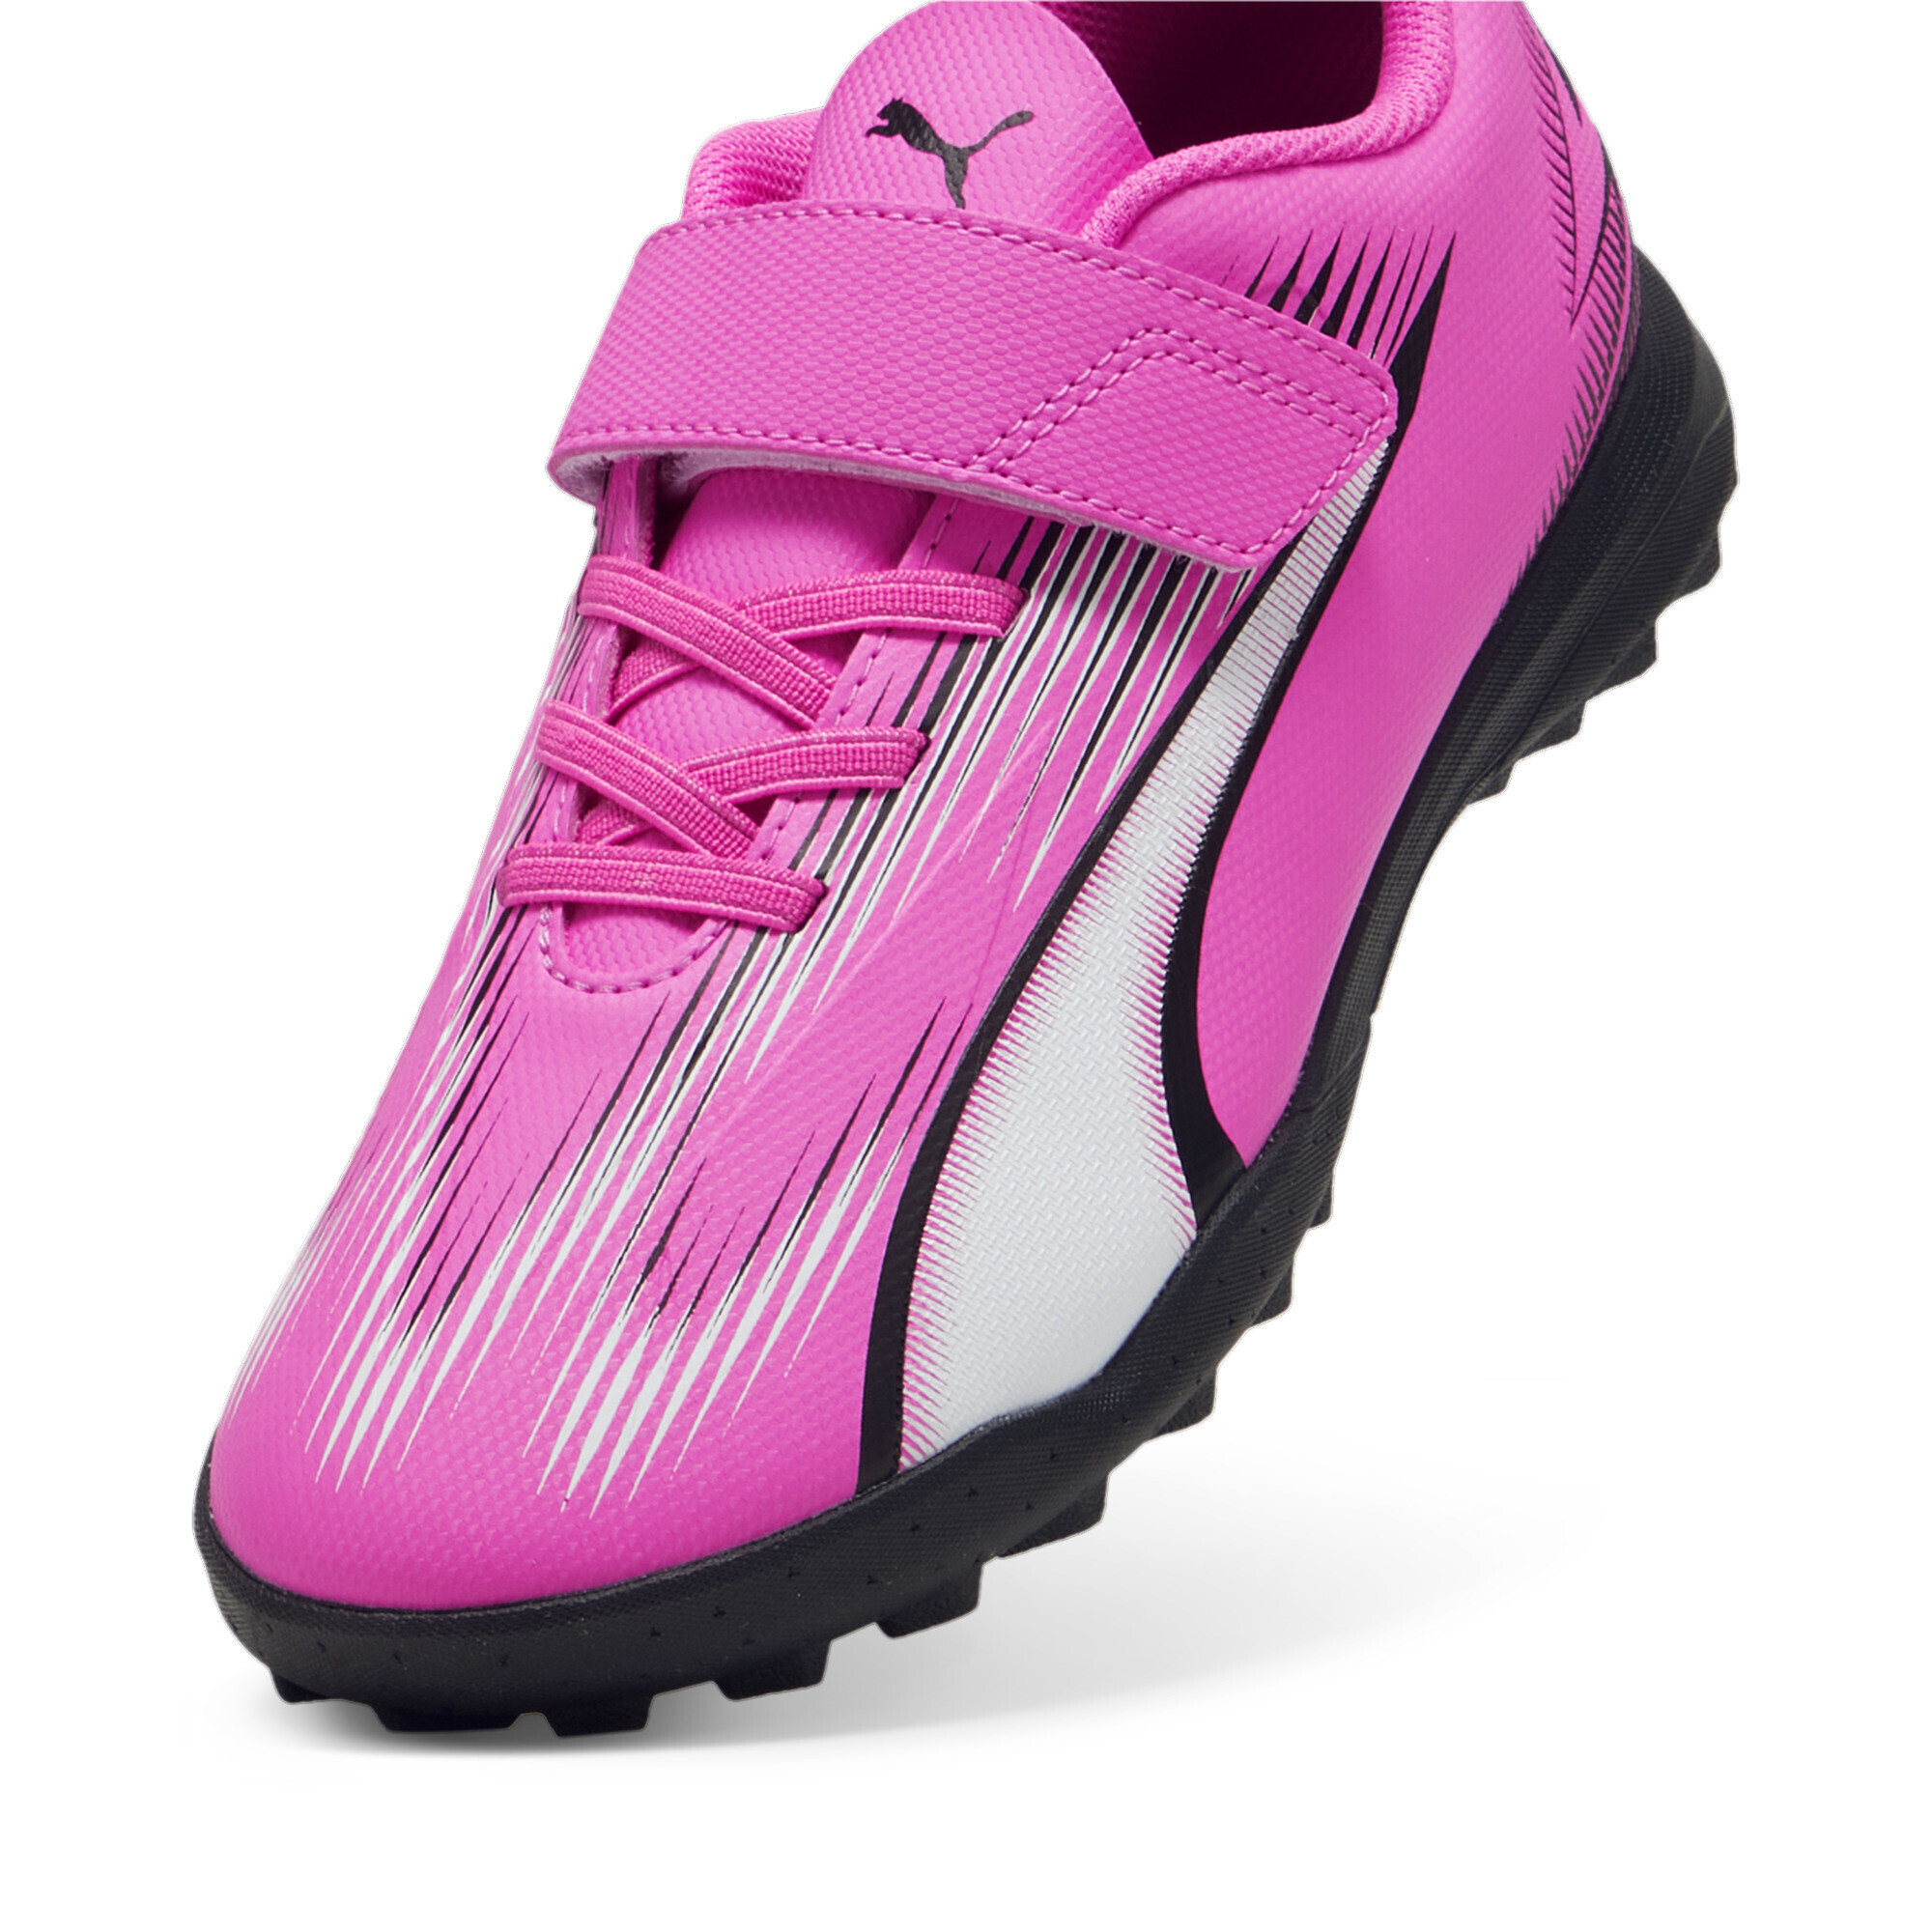 PUMA ULTRA PLAY TT Youth Football Boots In Pink, Size EU 37